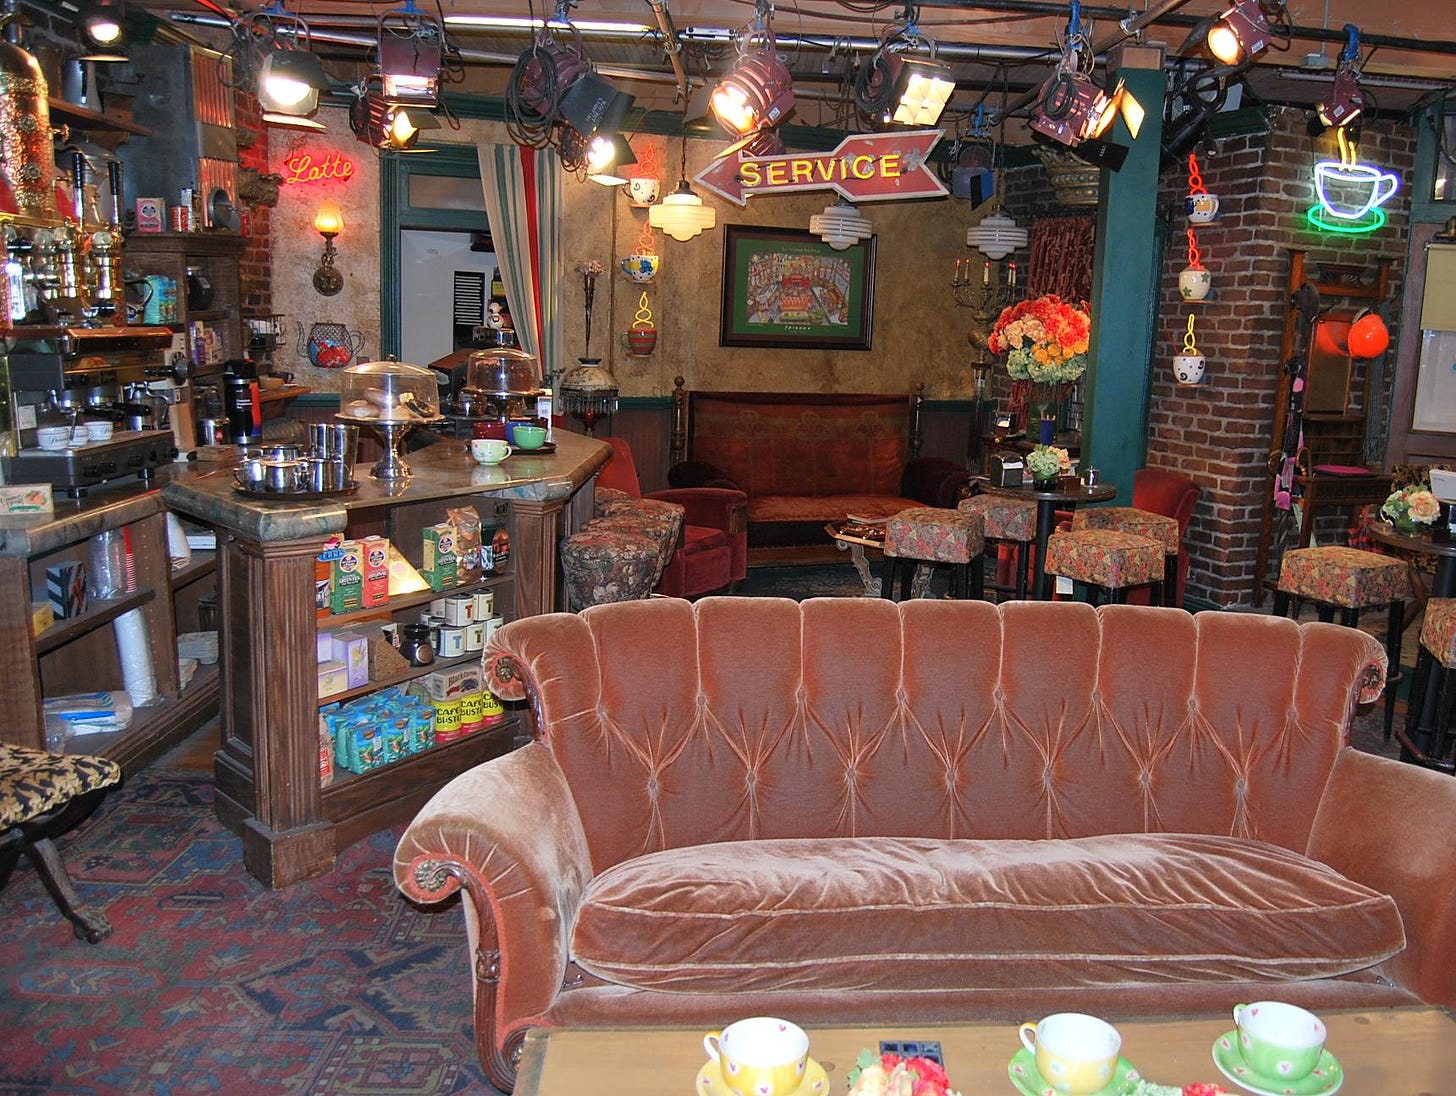 A photo of the Central Perk Coffee Shop set from the TV show friends. A worn, vintage-style red/orange couch dominates the foreground with a cluttered coffee county and stools in the background.